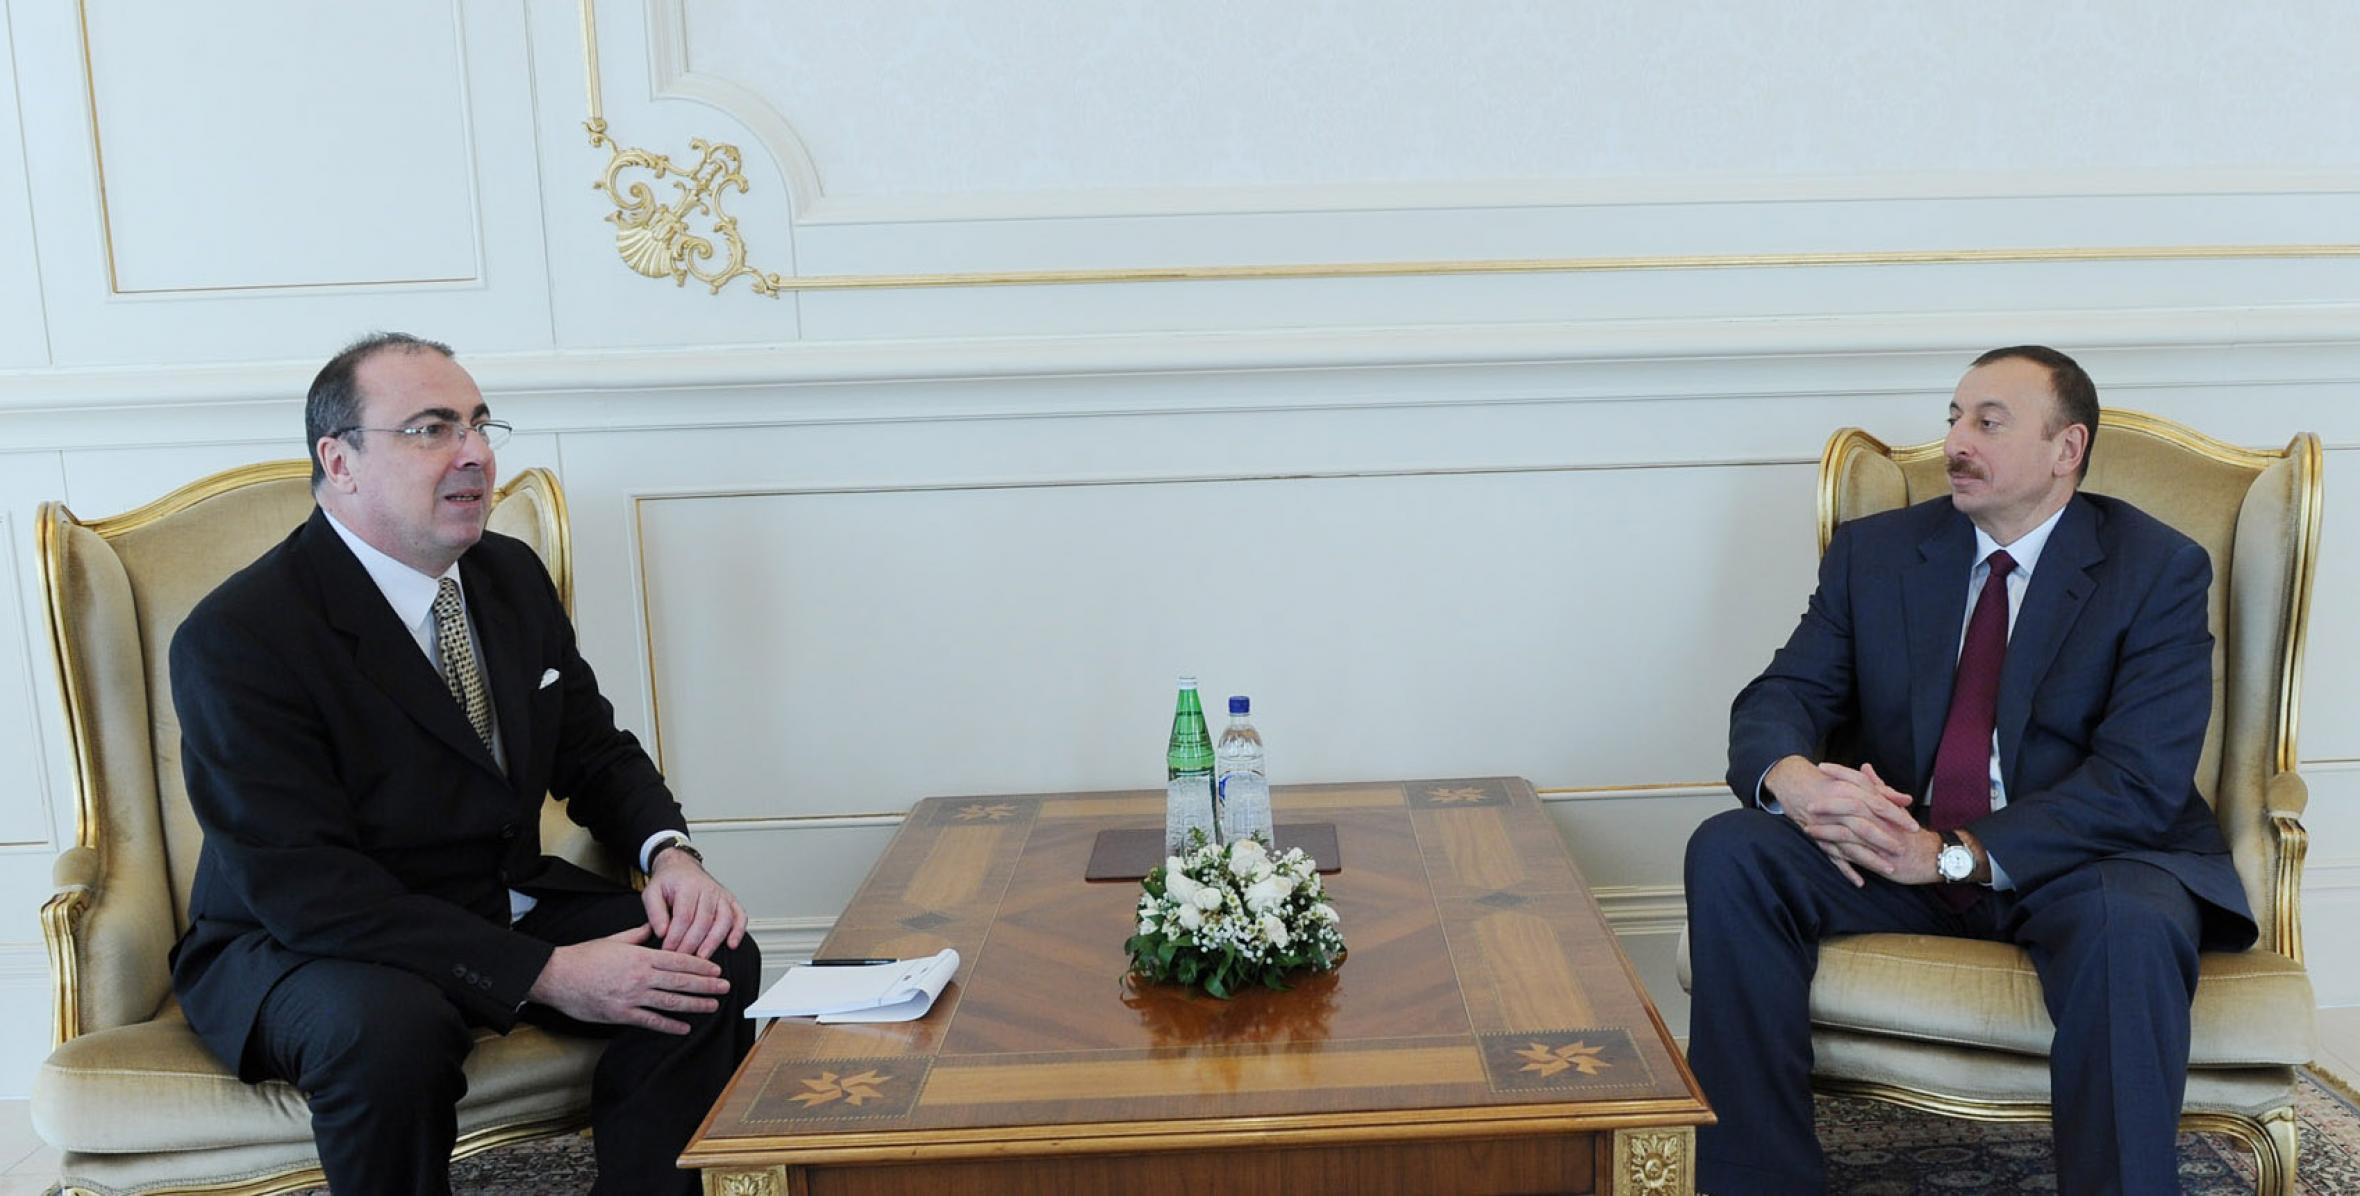 Ilham Aliyev accepted the credentials of a newly-appointed Ambassador of Argentina to Azerbaijan